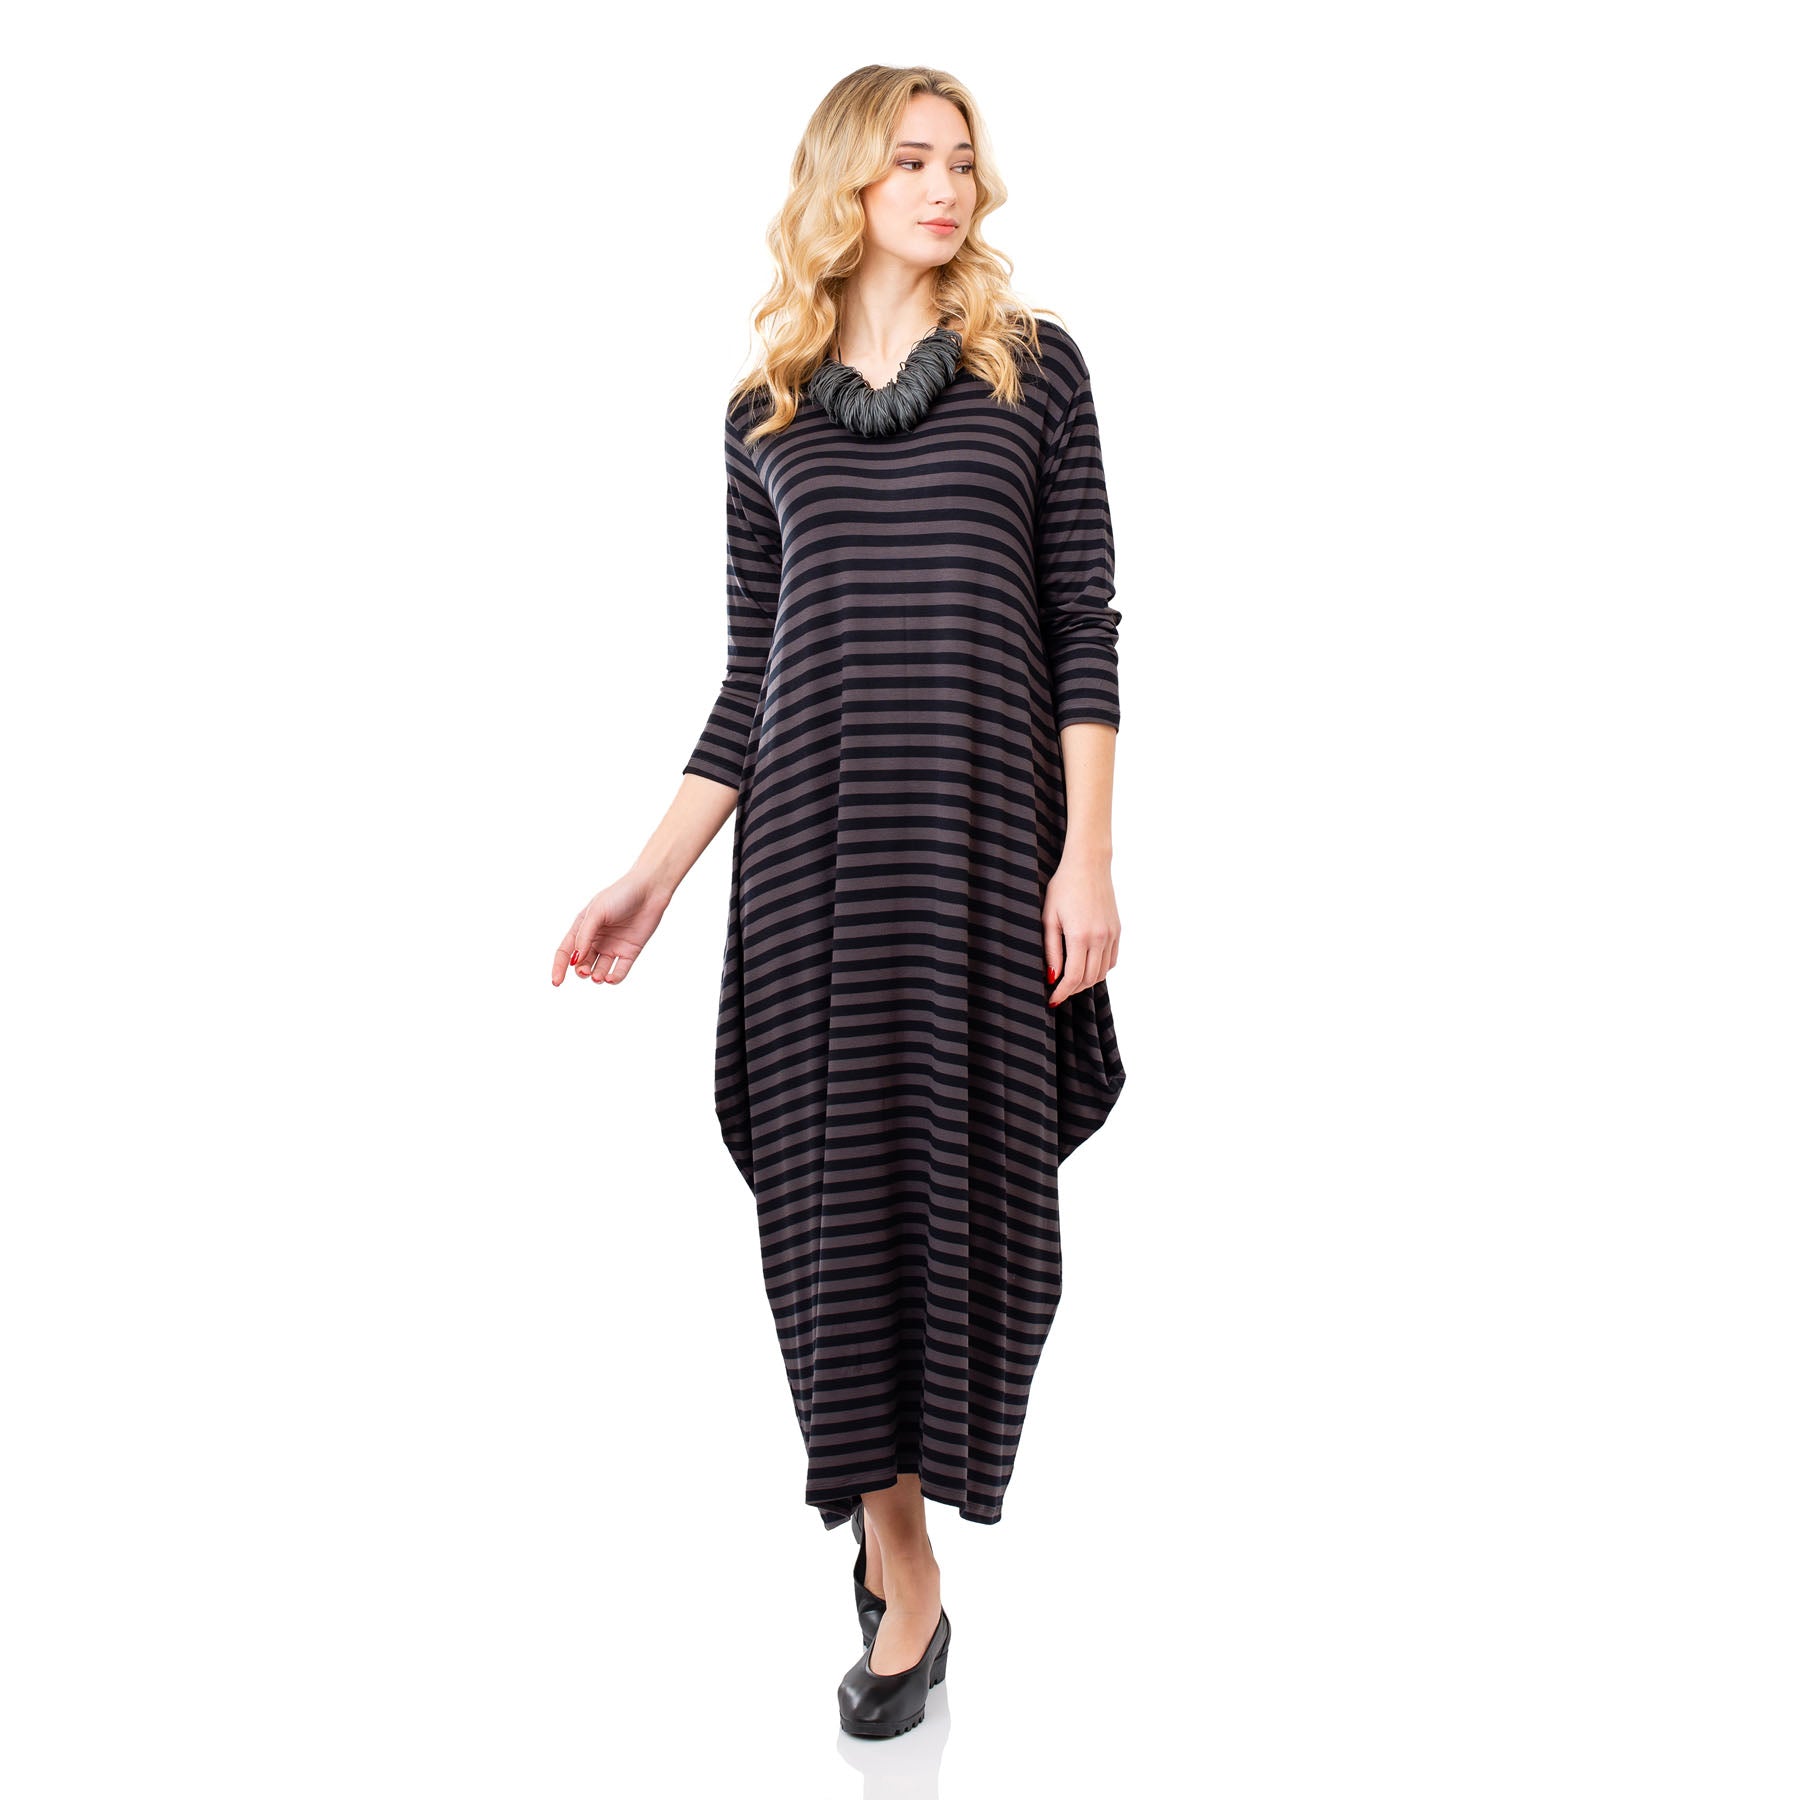 Artemis Dress - Black/Grey Striped - CHIC AND SIMPLE